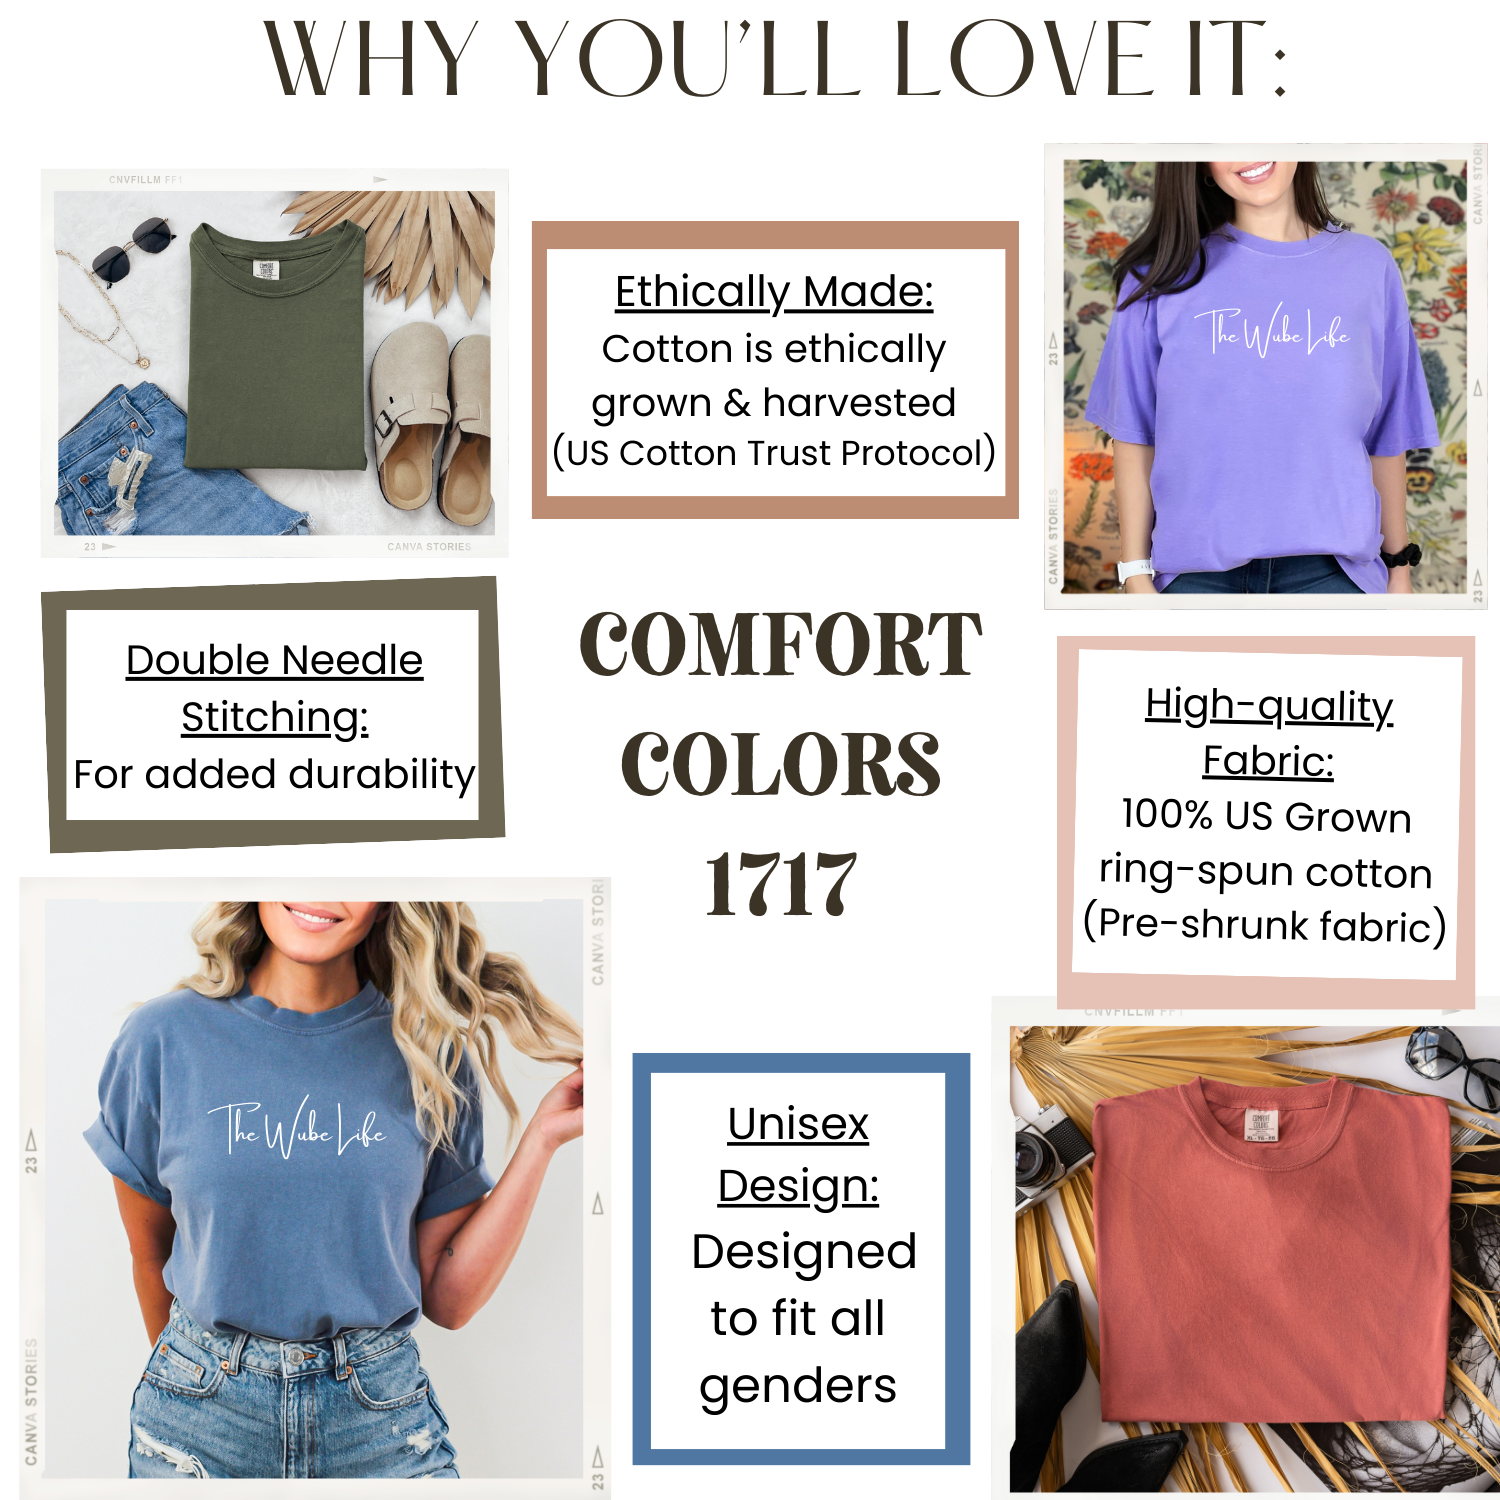 Reasons you'll love the comfort colors 1717 t-shirts from The Wube Life Design Shop: ethically made, high-quality fabric, unisex design, double-needle stitching